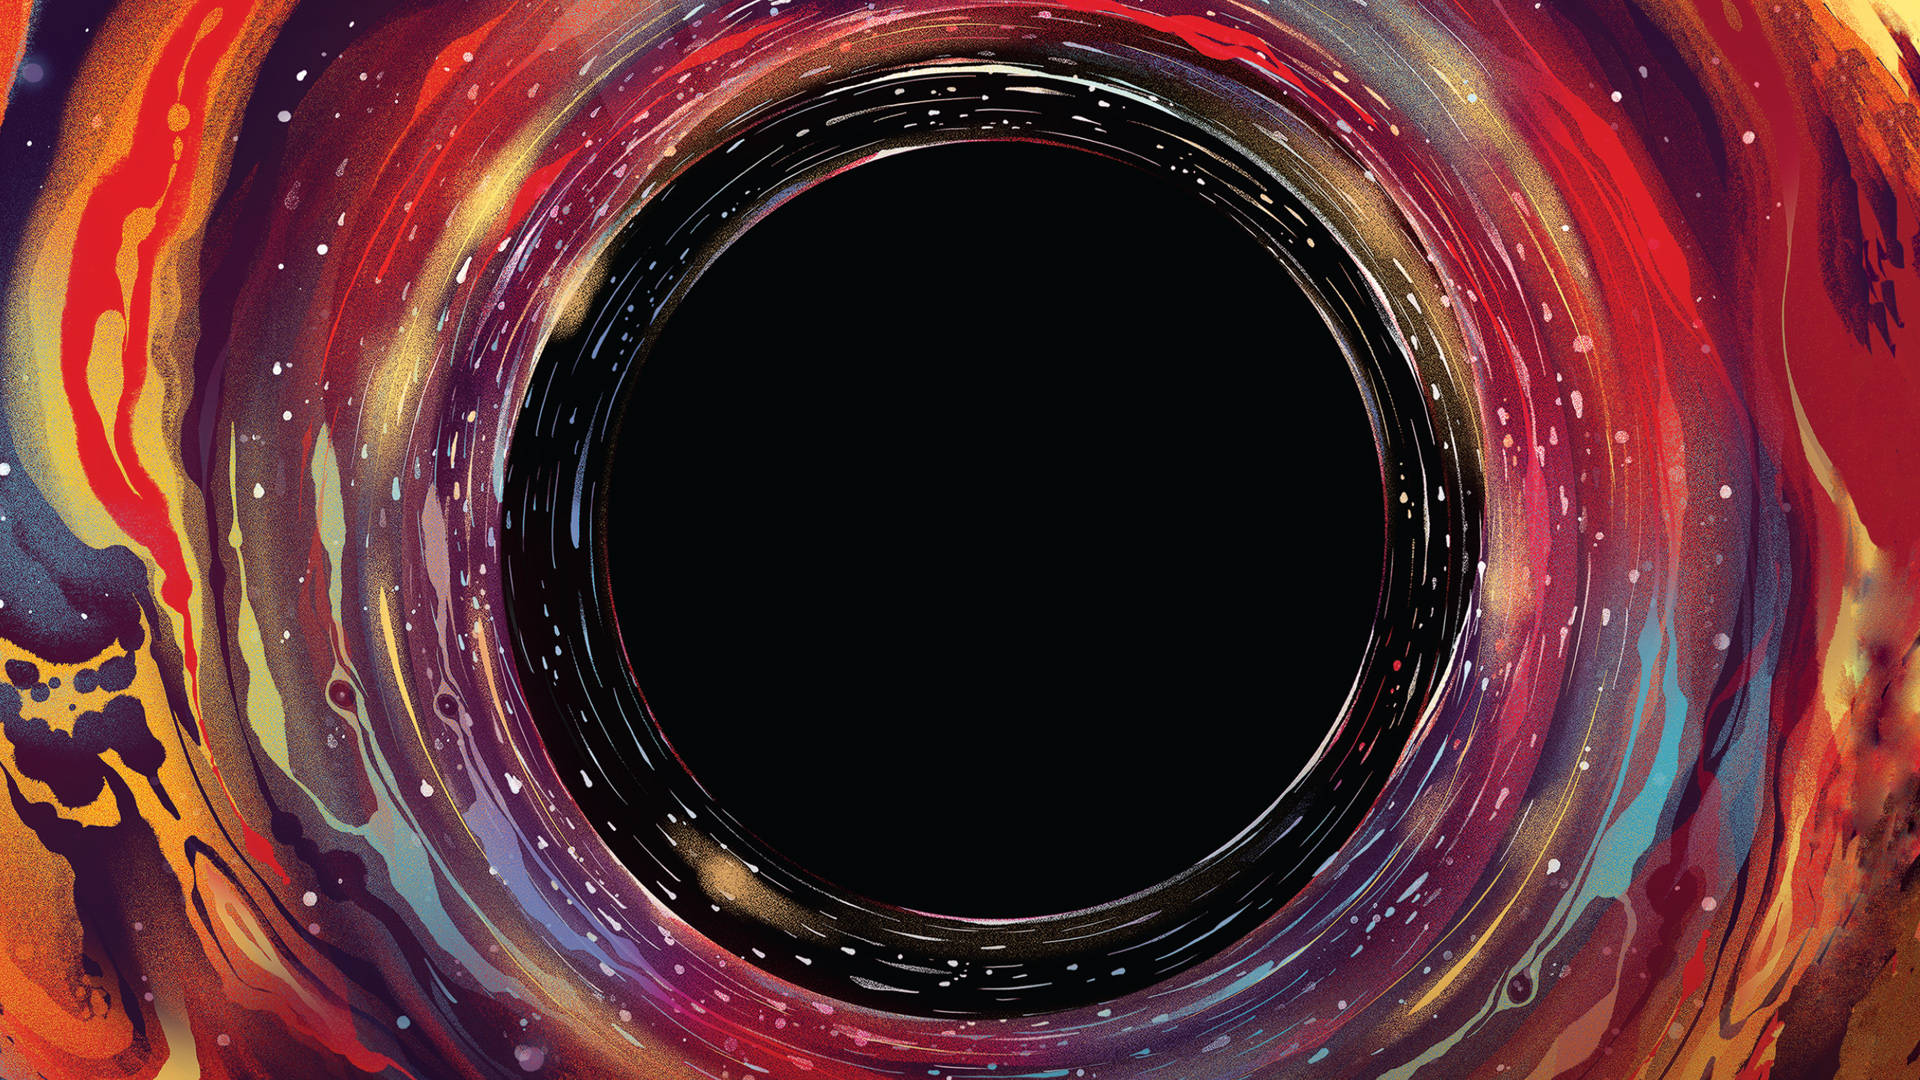 A Black Hole With Colorful Swirls And Swirls Wallpaper